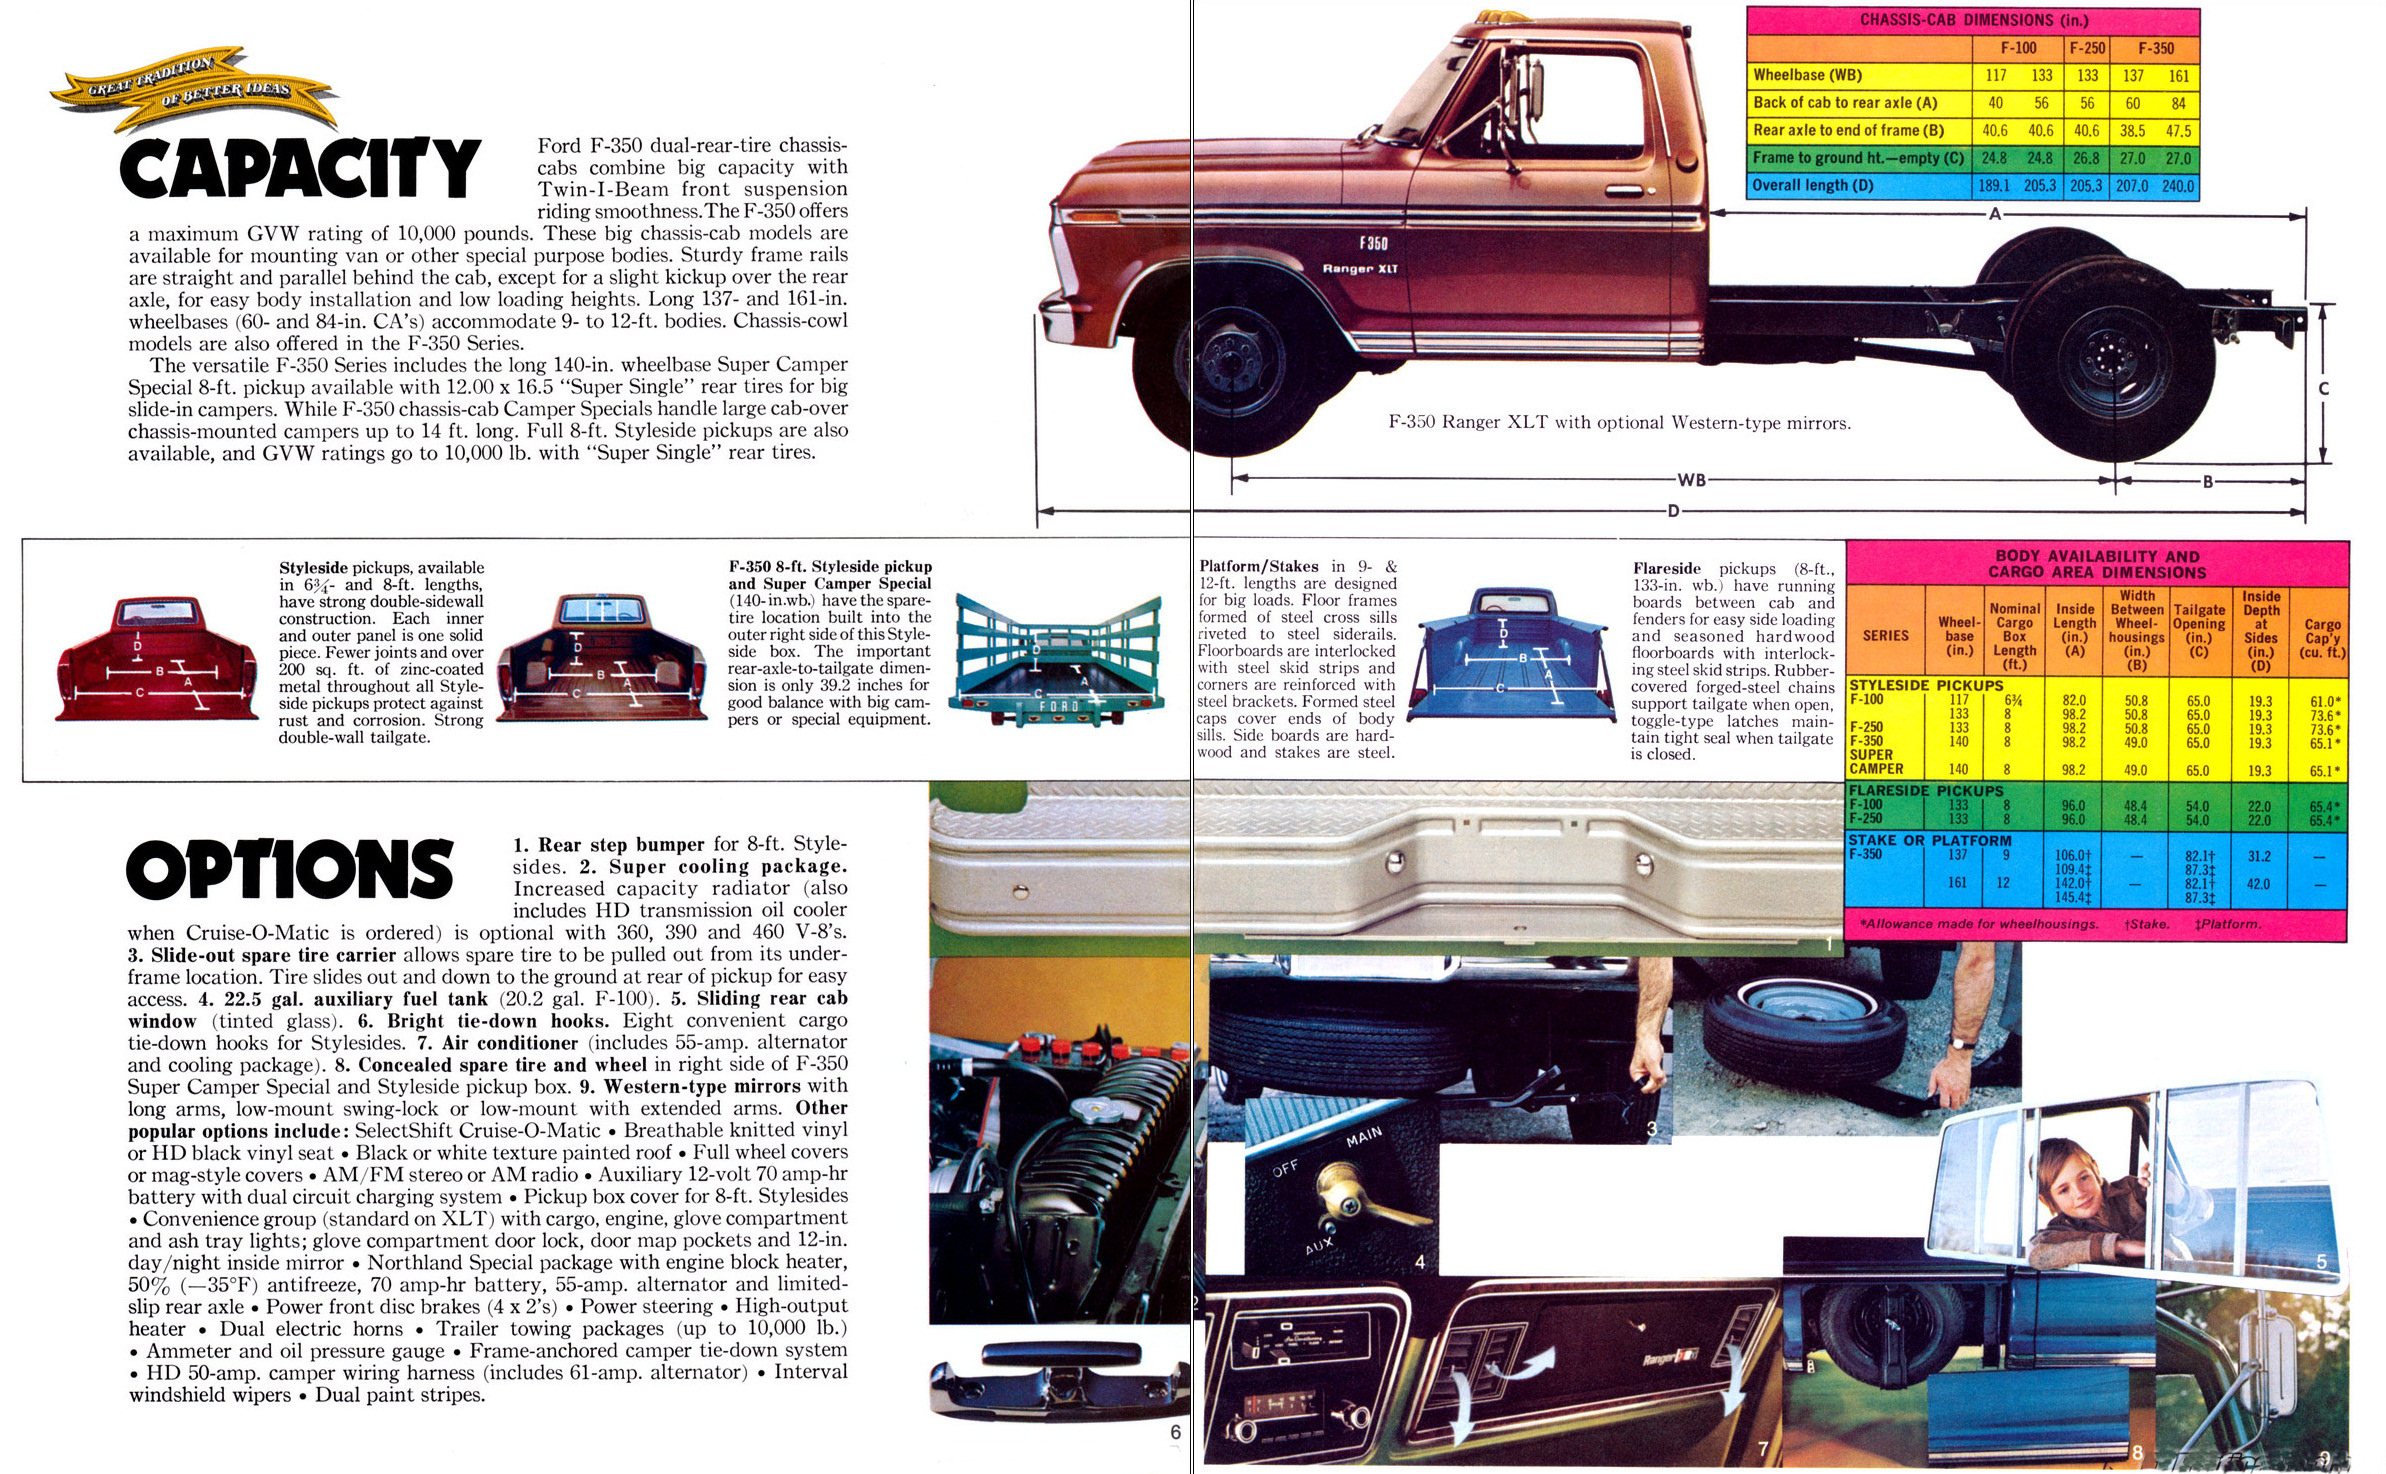 1974_Ford_Pickups-10-11